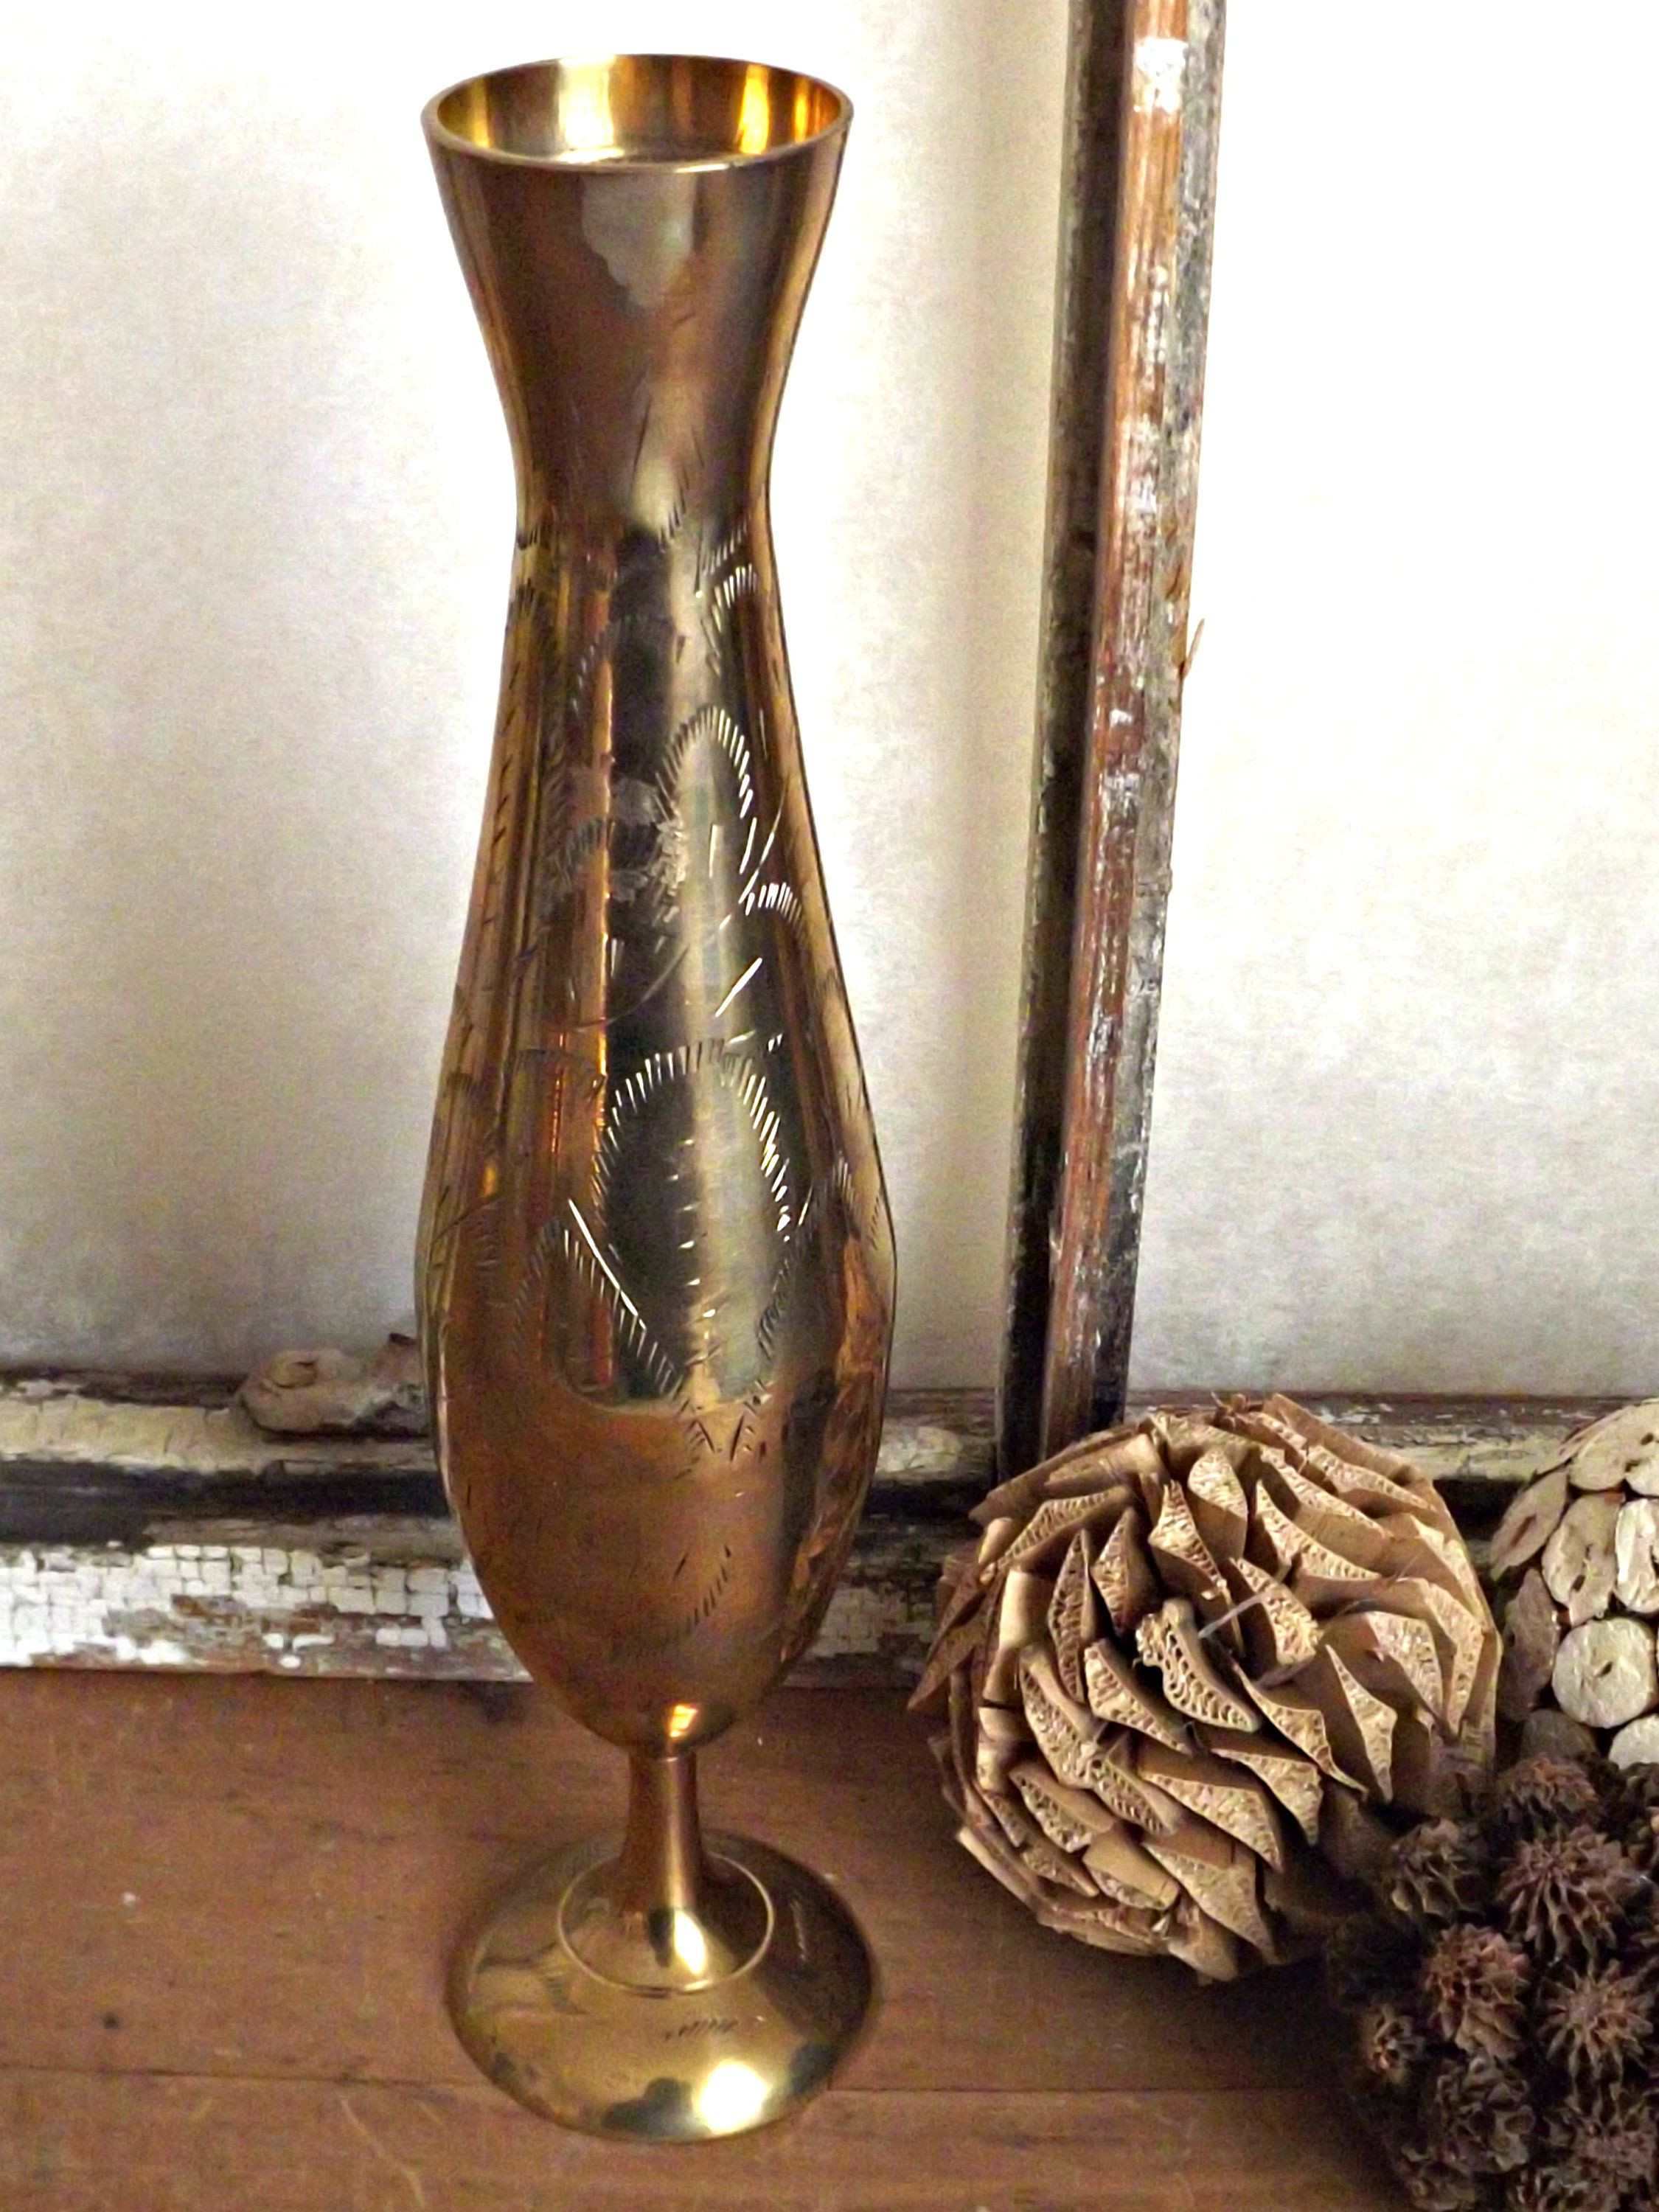 14 Elegant Etched Brass Vase From India 2024 free download etched brass vase from india of solid brass vase boho decor etched brass vase retro brass decor within solid brass vase boho decor etched brass vase retro bass decor vintage